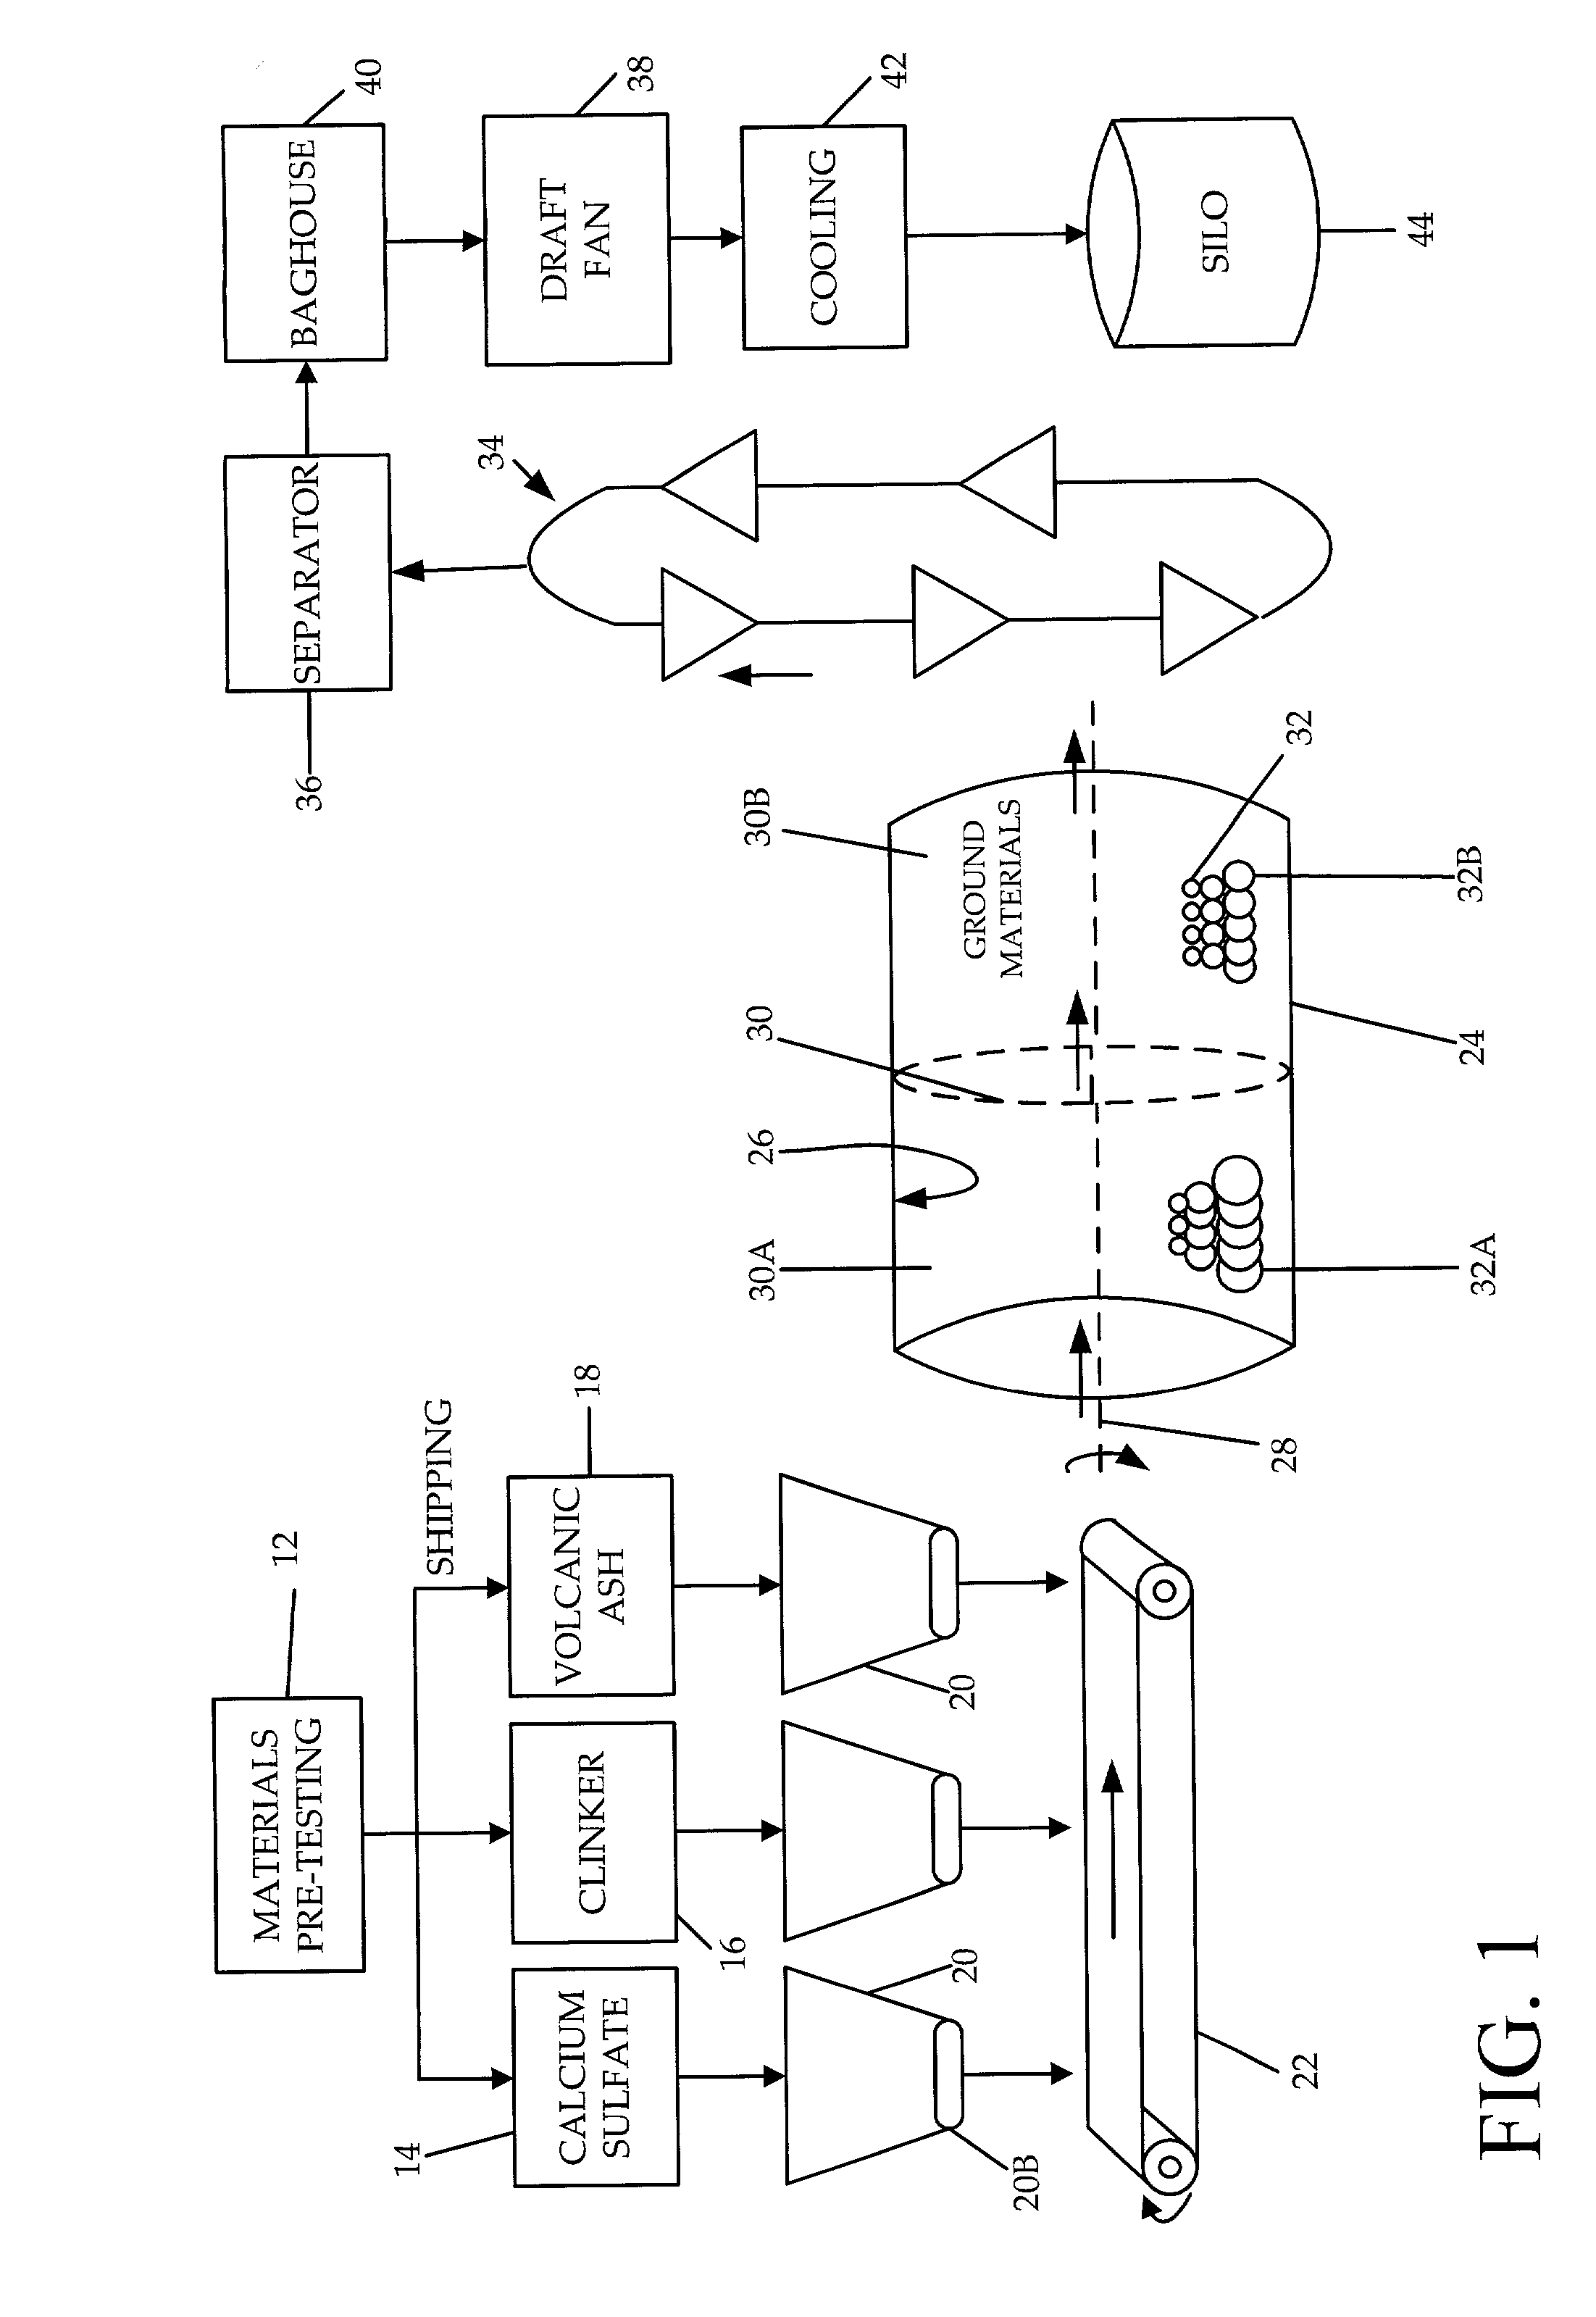 Process for producing a blended cement having enhanced cementitious properties capable of combination with class C fly ash